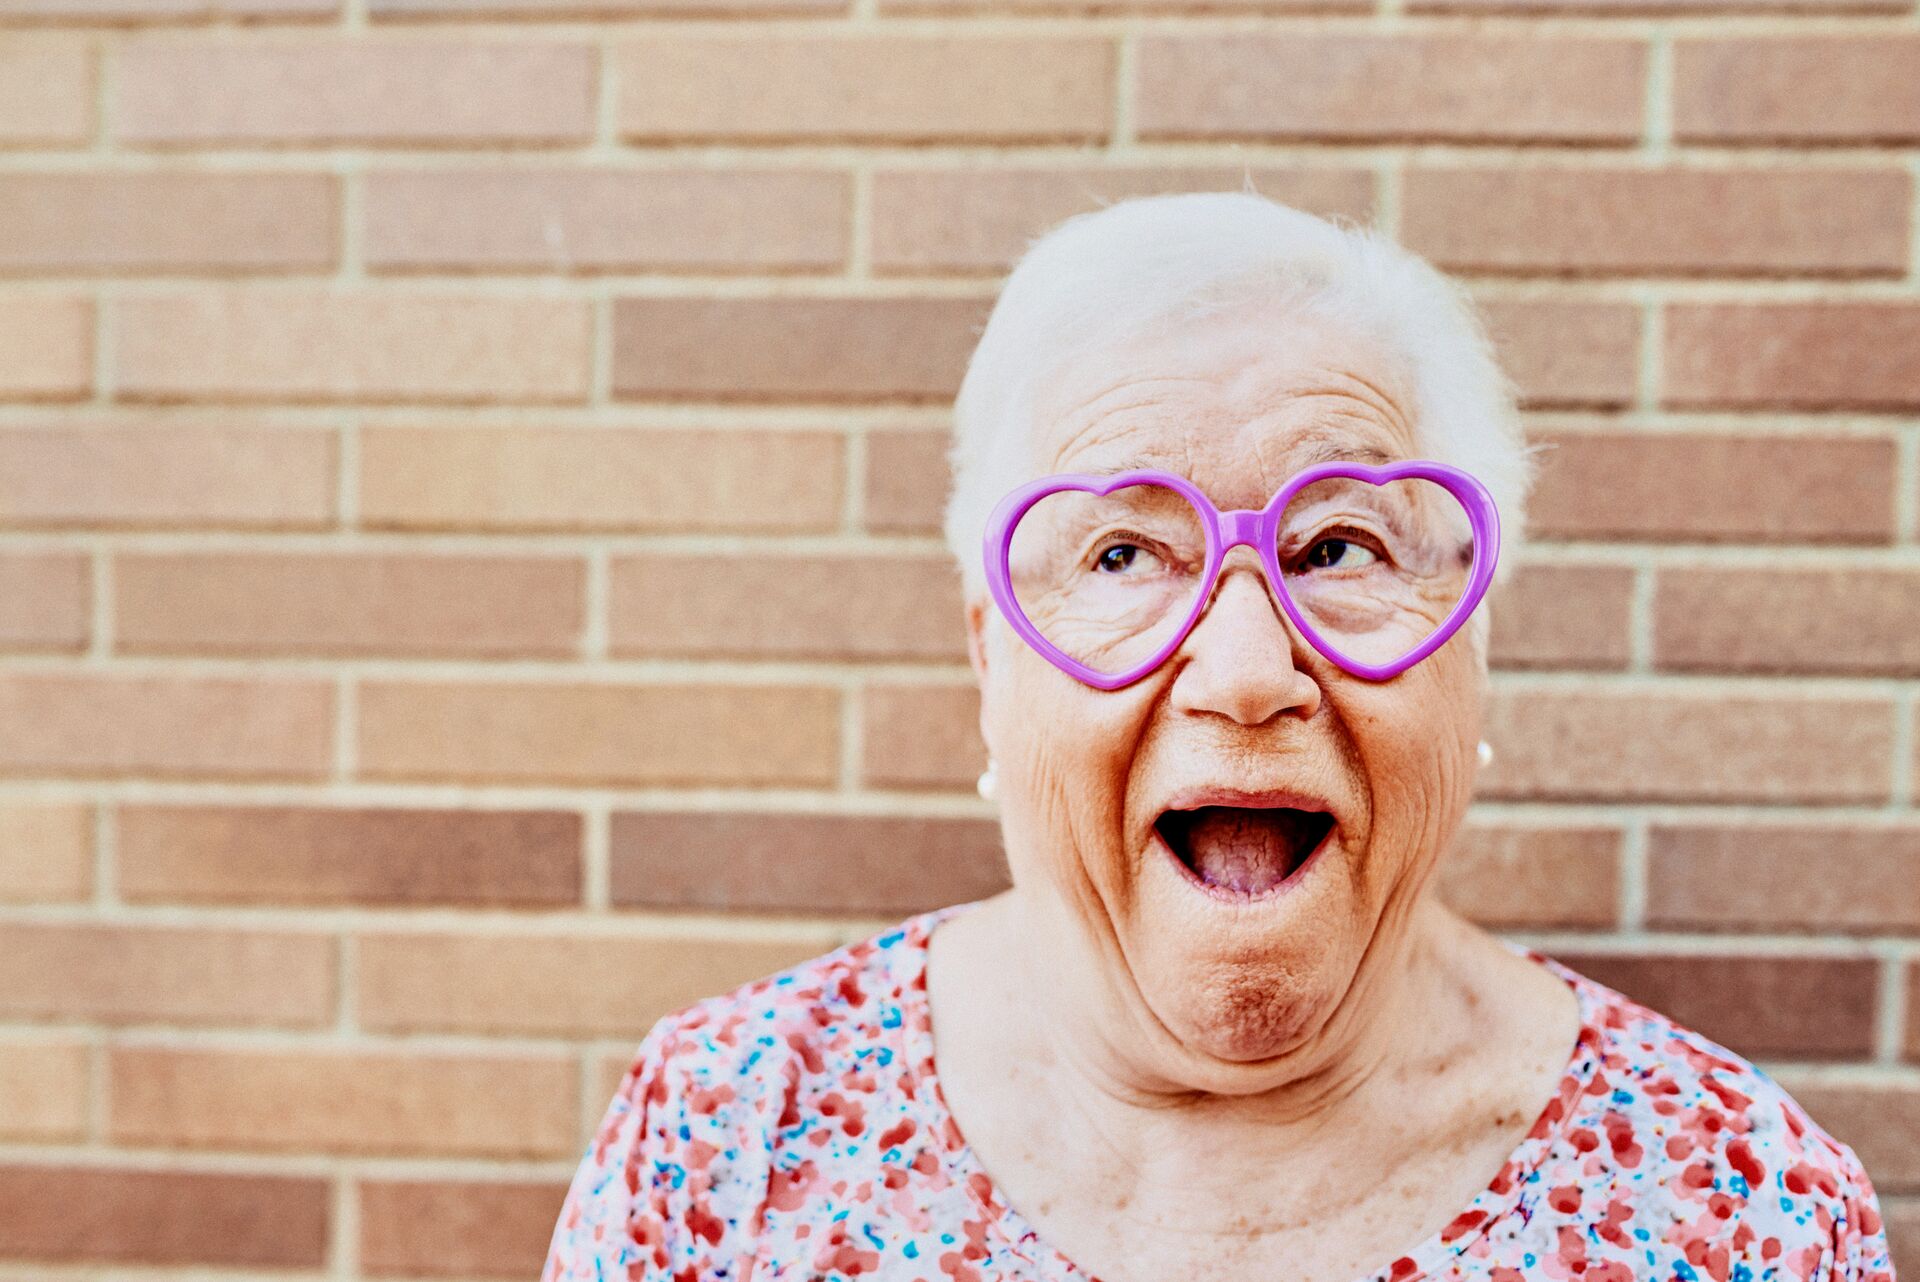 Large_MS PPT_Web-A senior woman with heart-shaped glasses makes a funny face outside in front of a brick wall.jpg